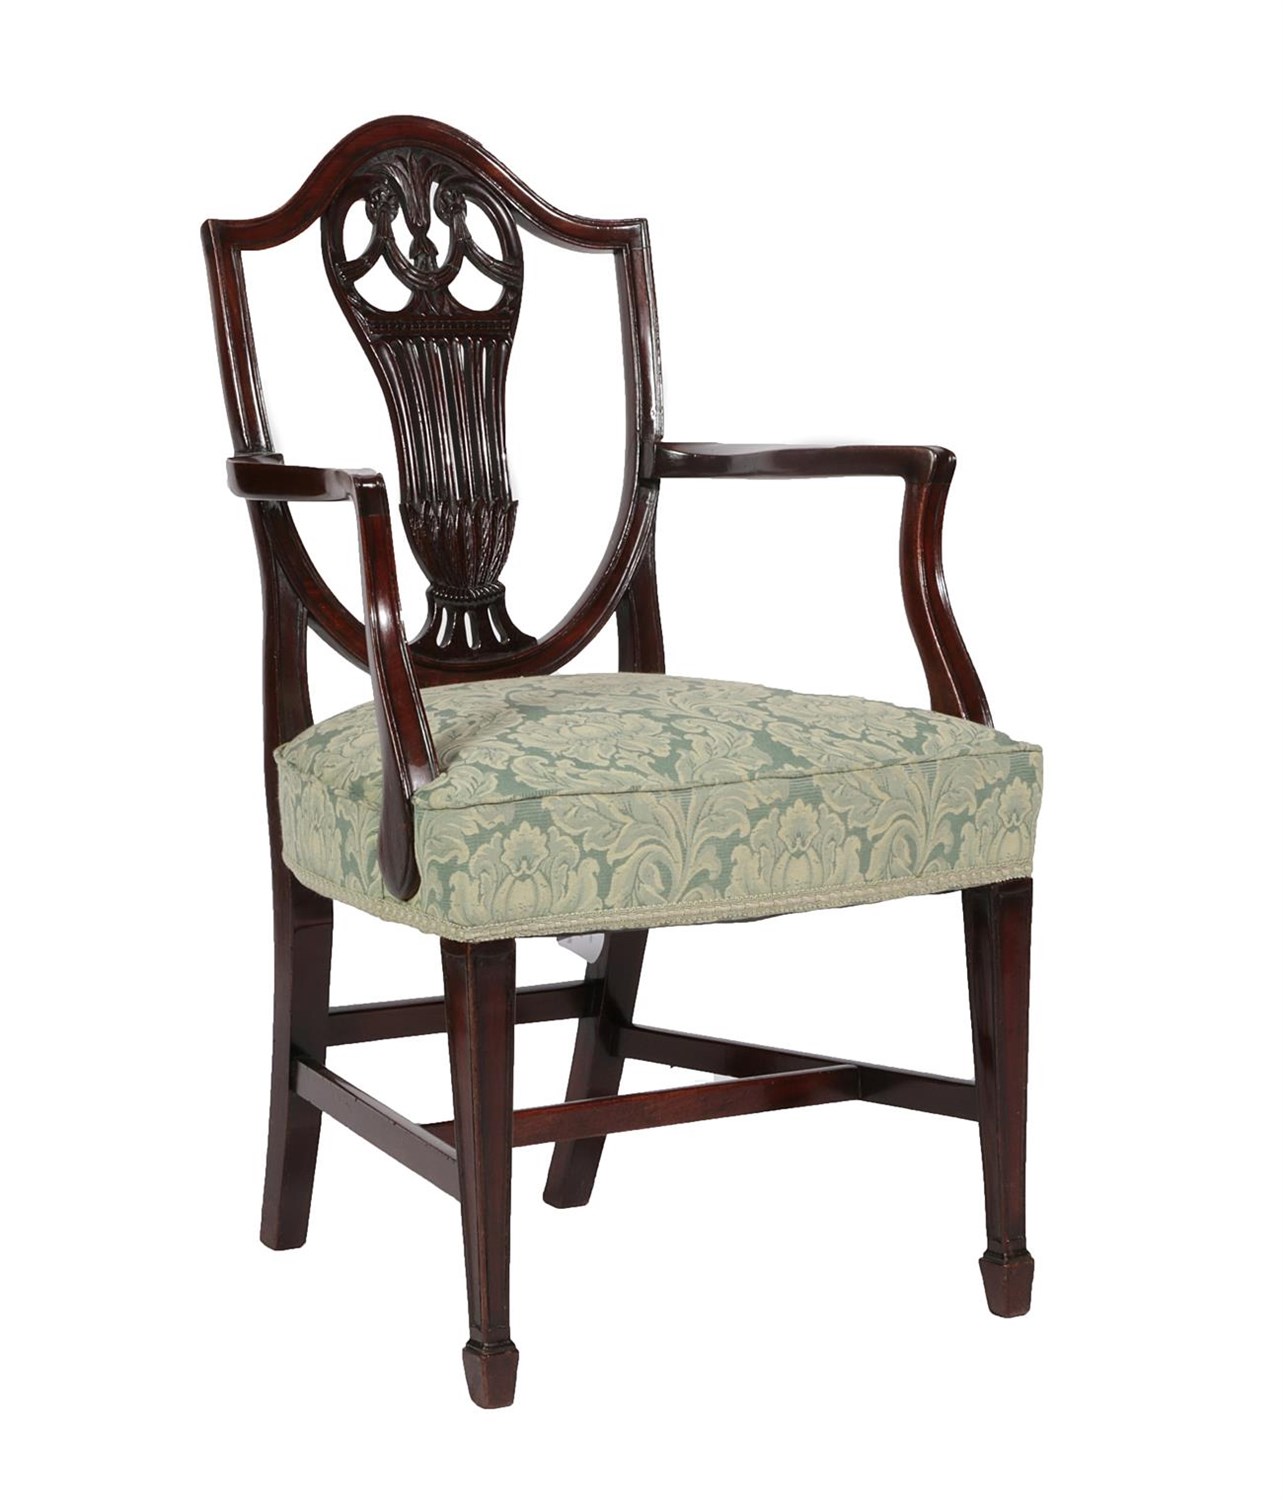 Lot 672 - <> A 19th Century Mahogany Hepplewhite Style Armchair, recovered in green floral fabric, the...